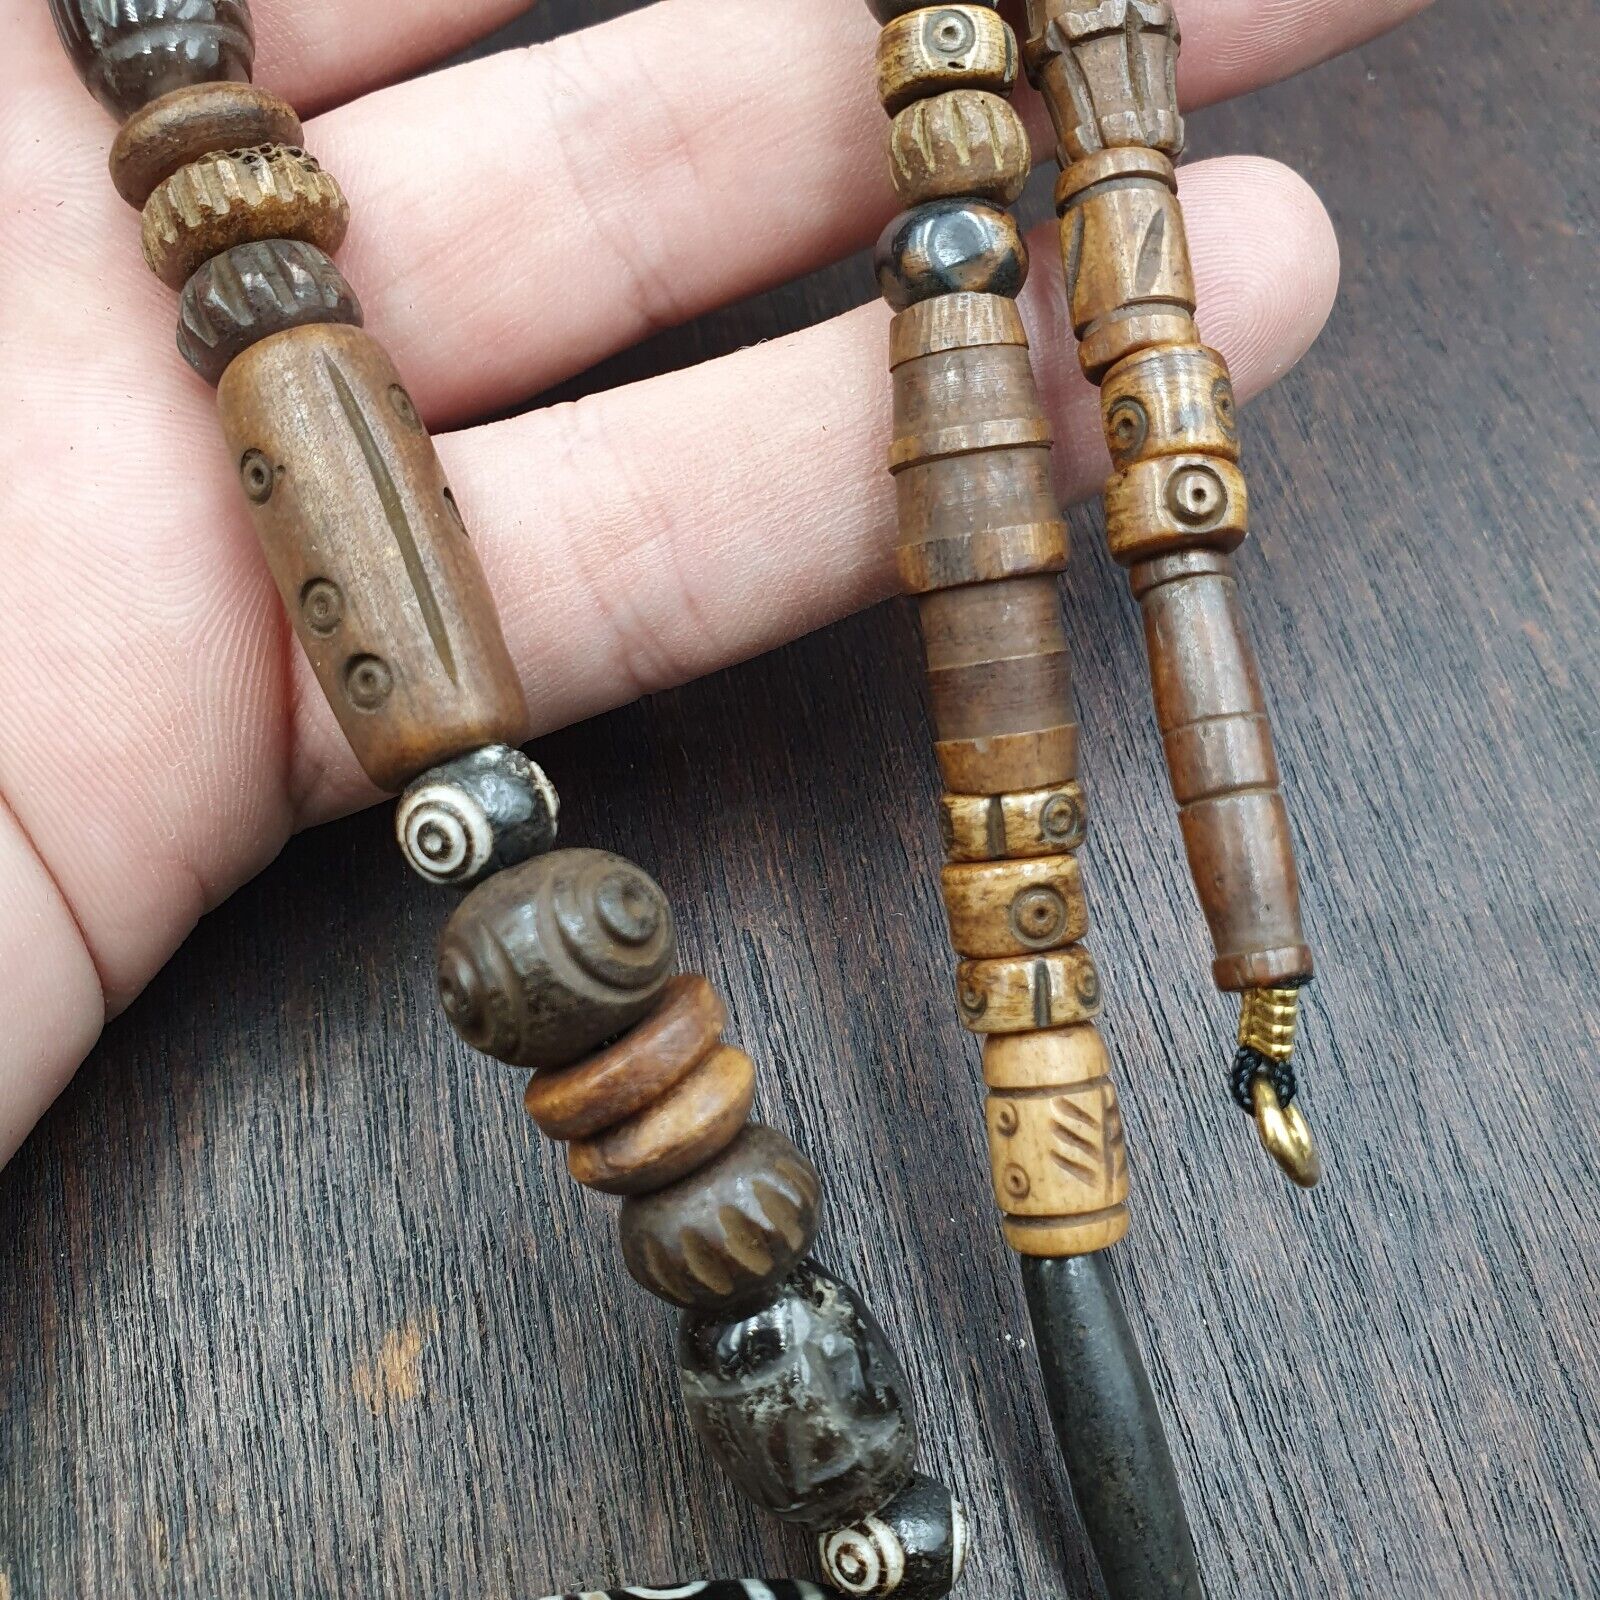 24 eyes Tibetan Himalayan bead old amulet Agate with carving Yak Bone Necklace